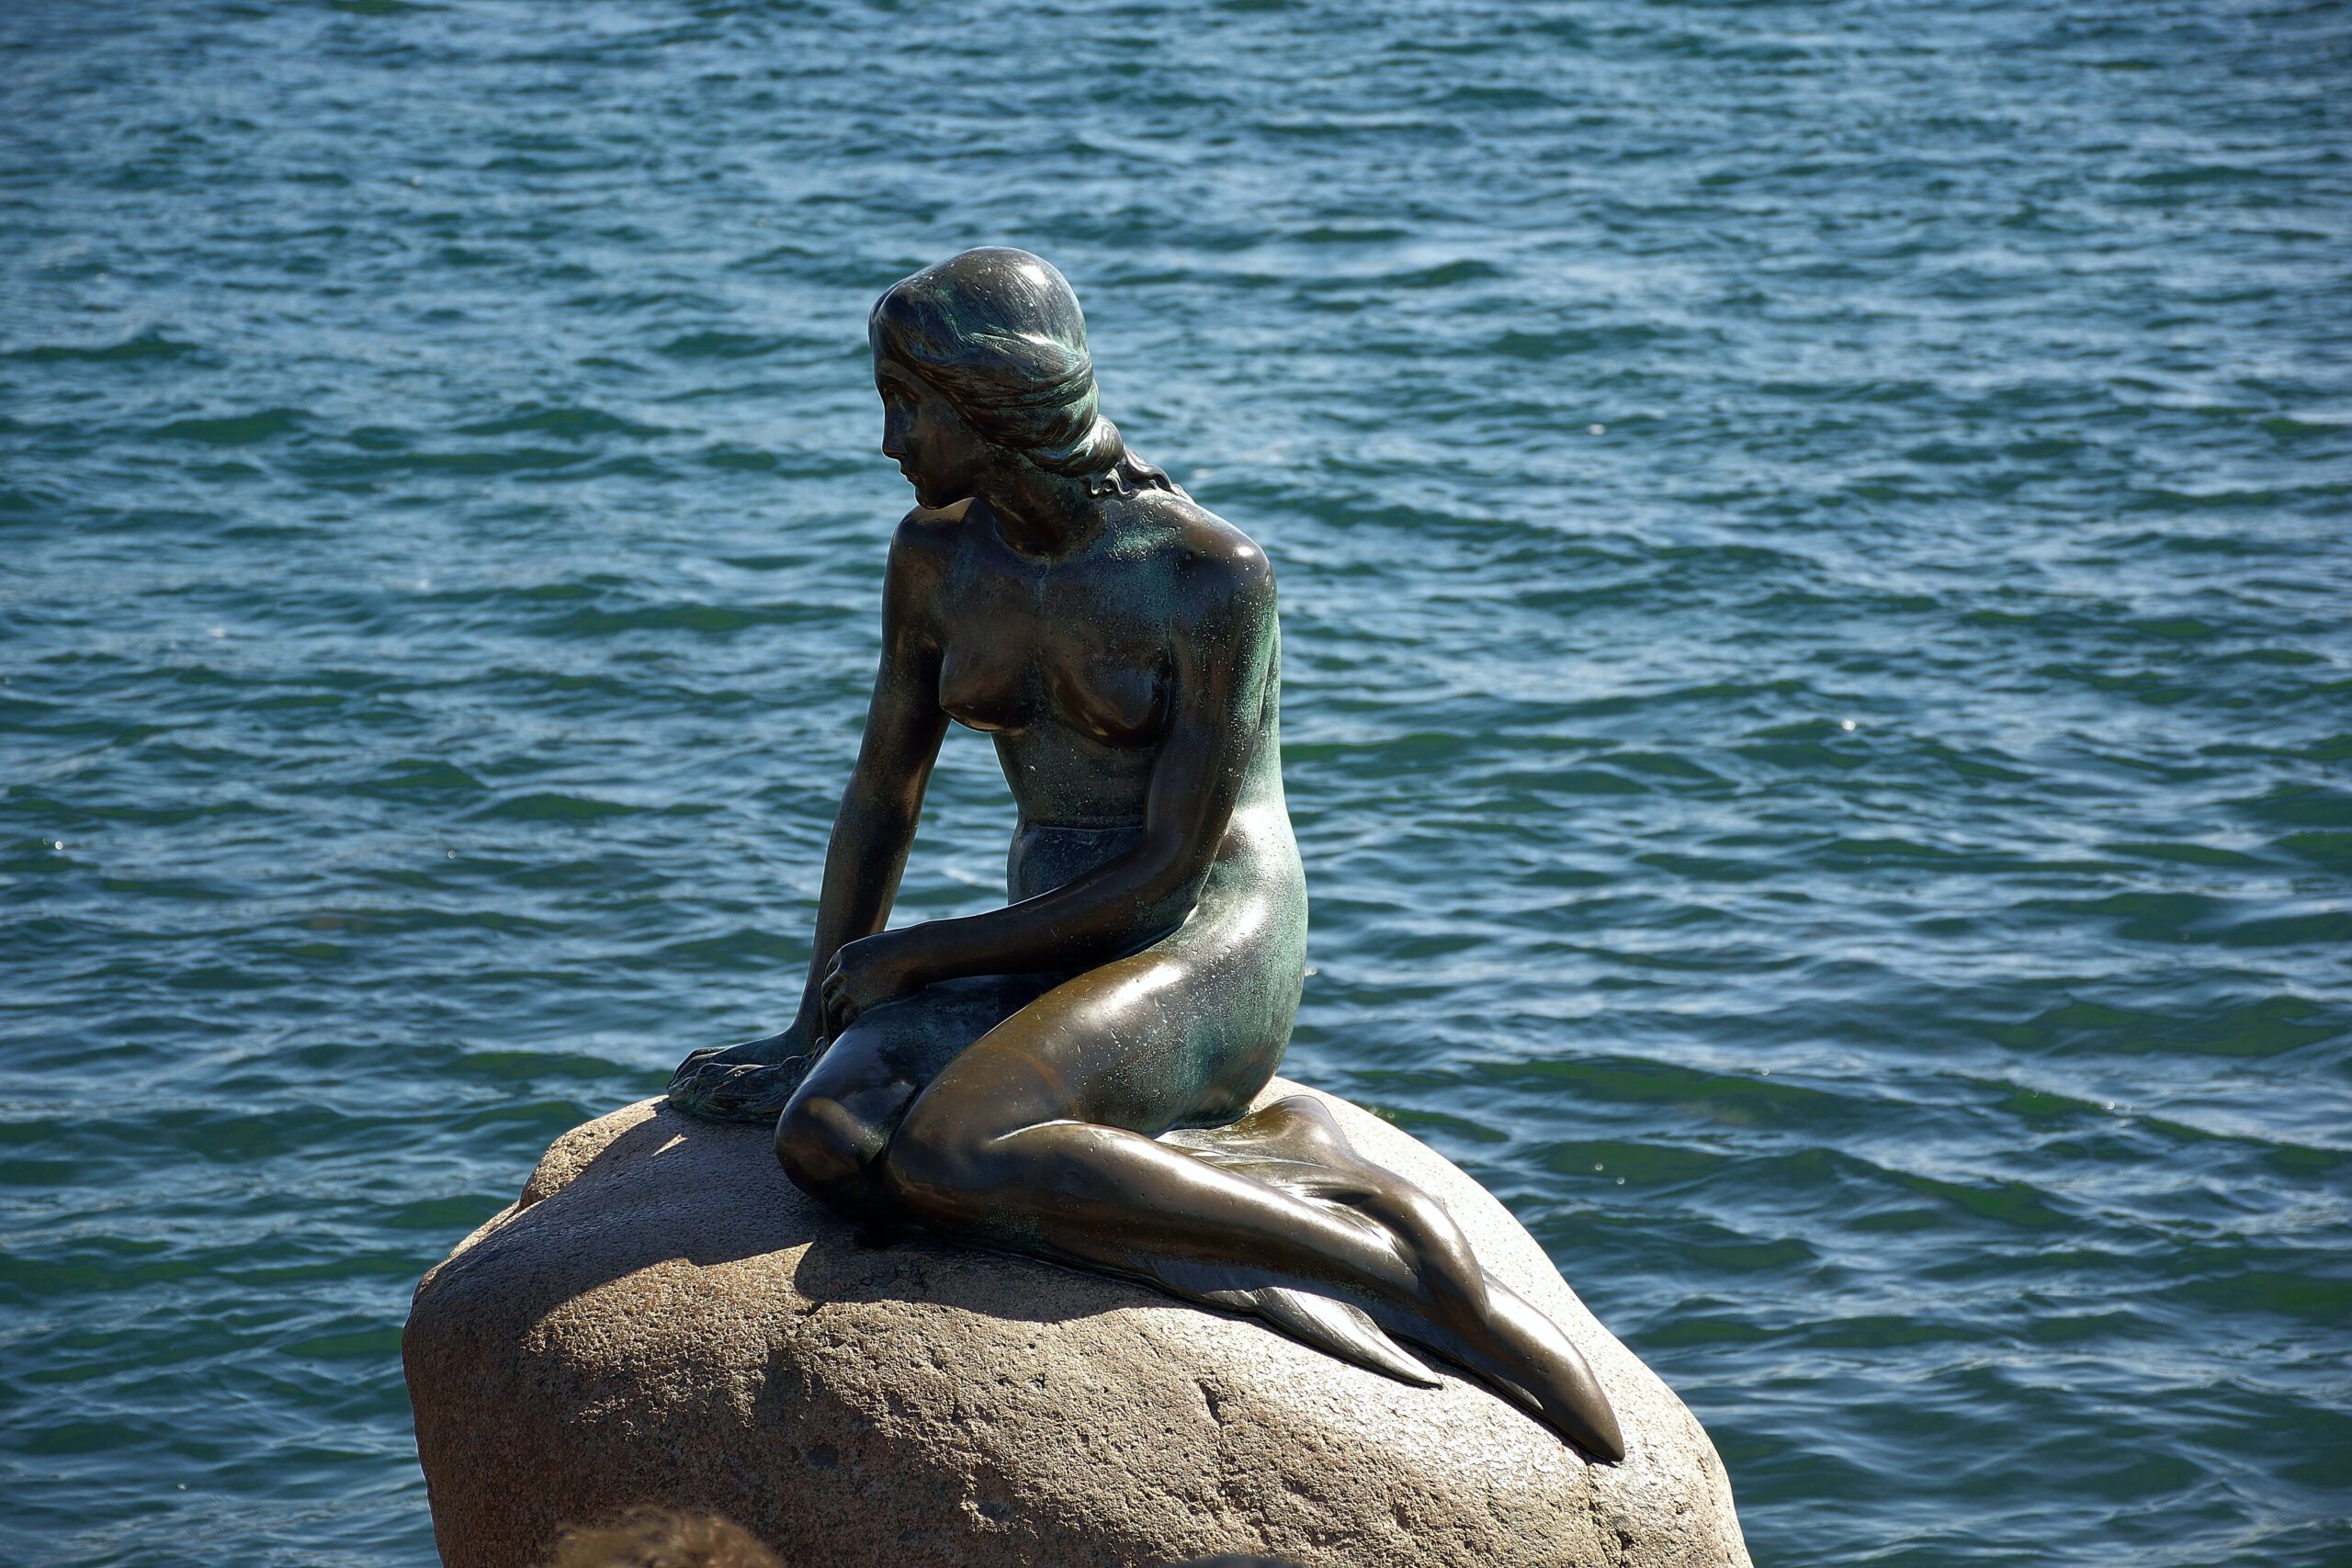 Statue of The Little Mermaid